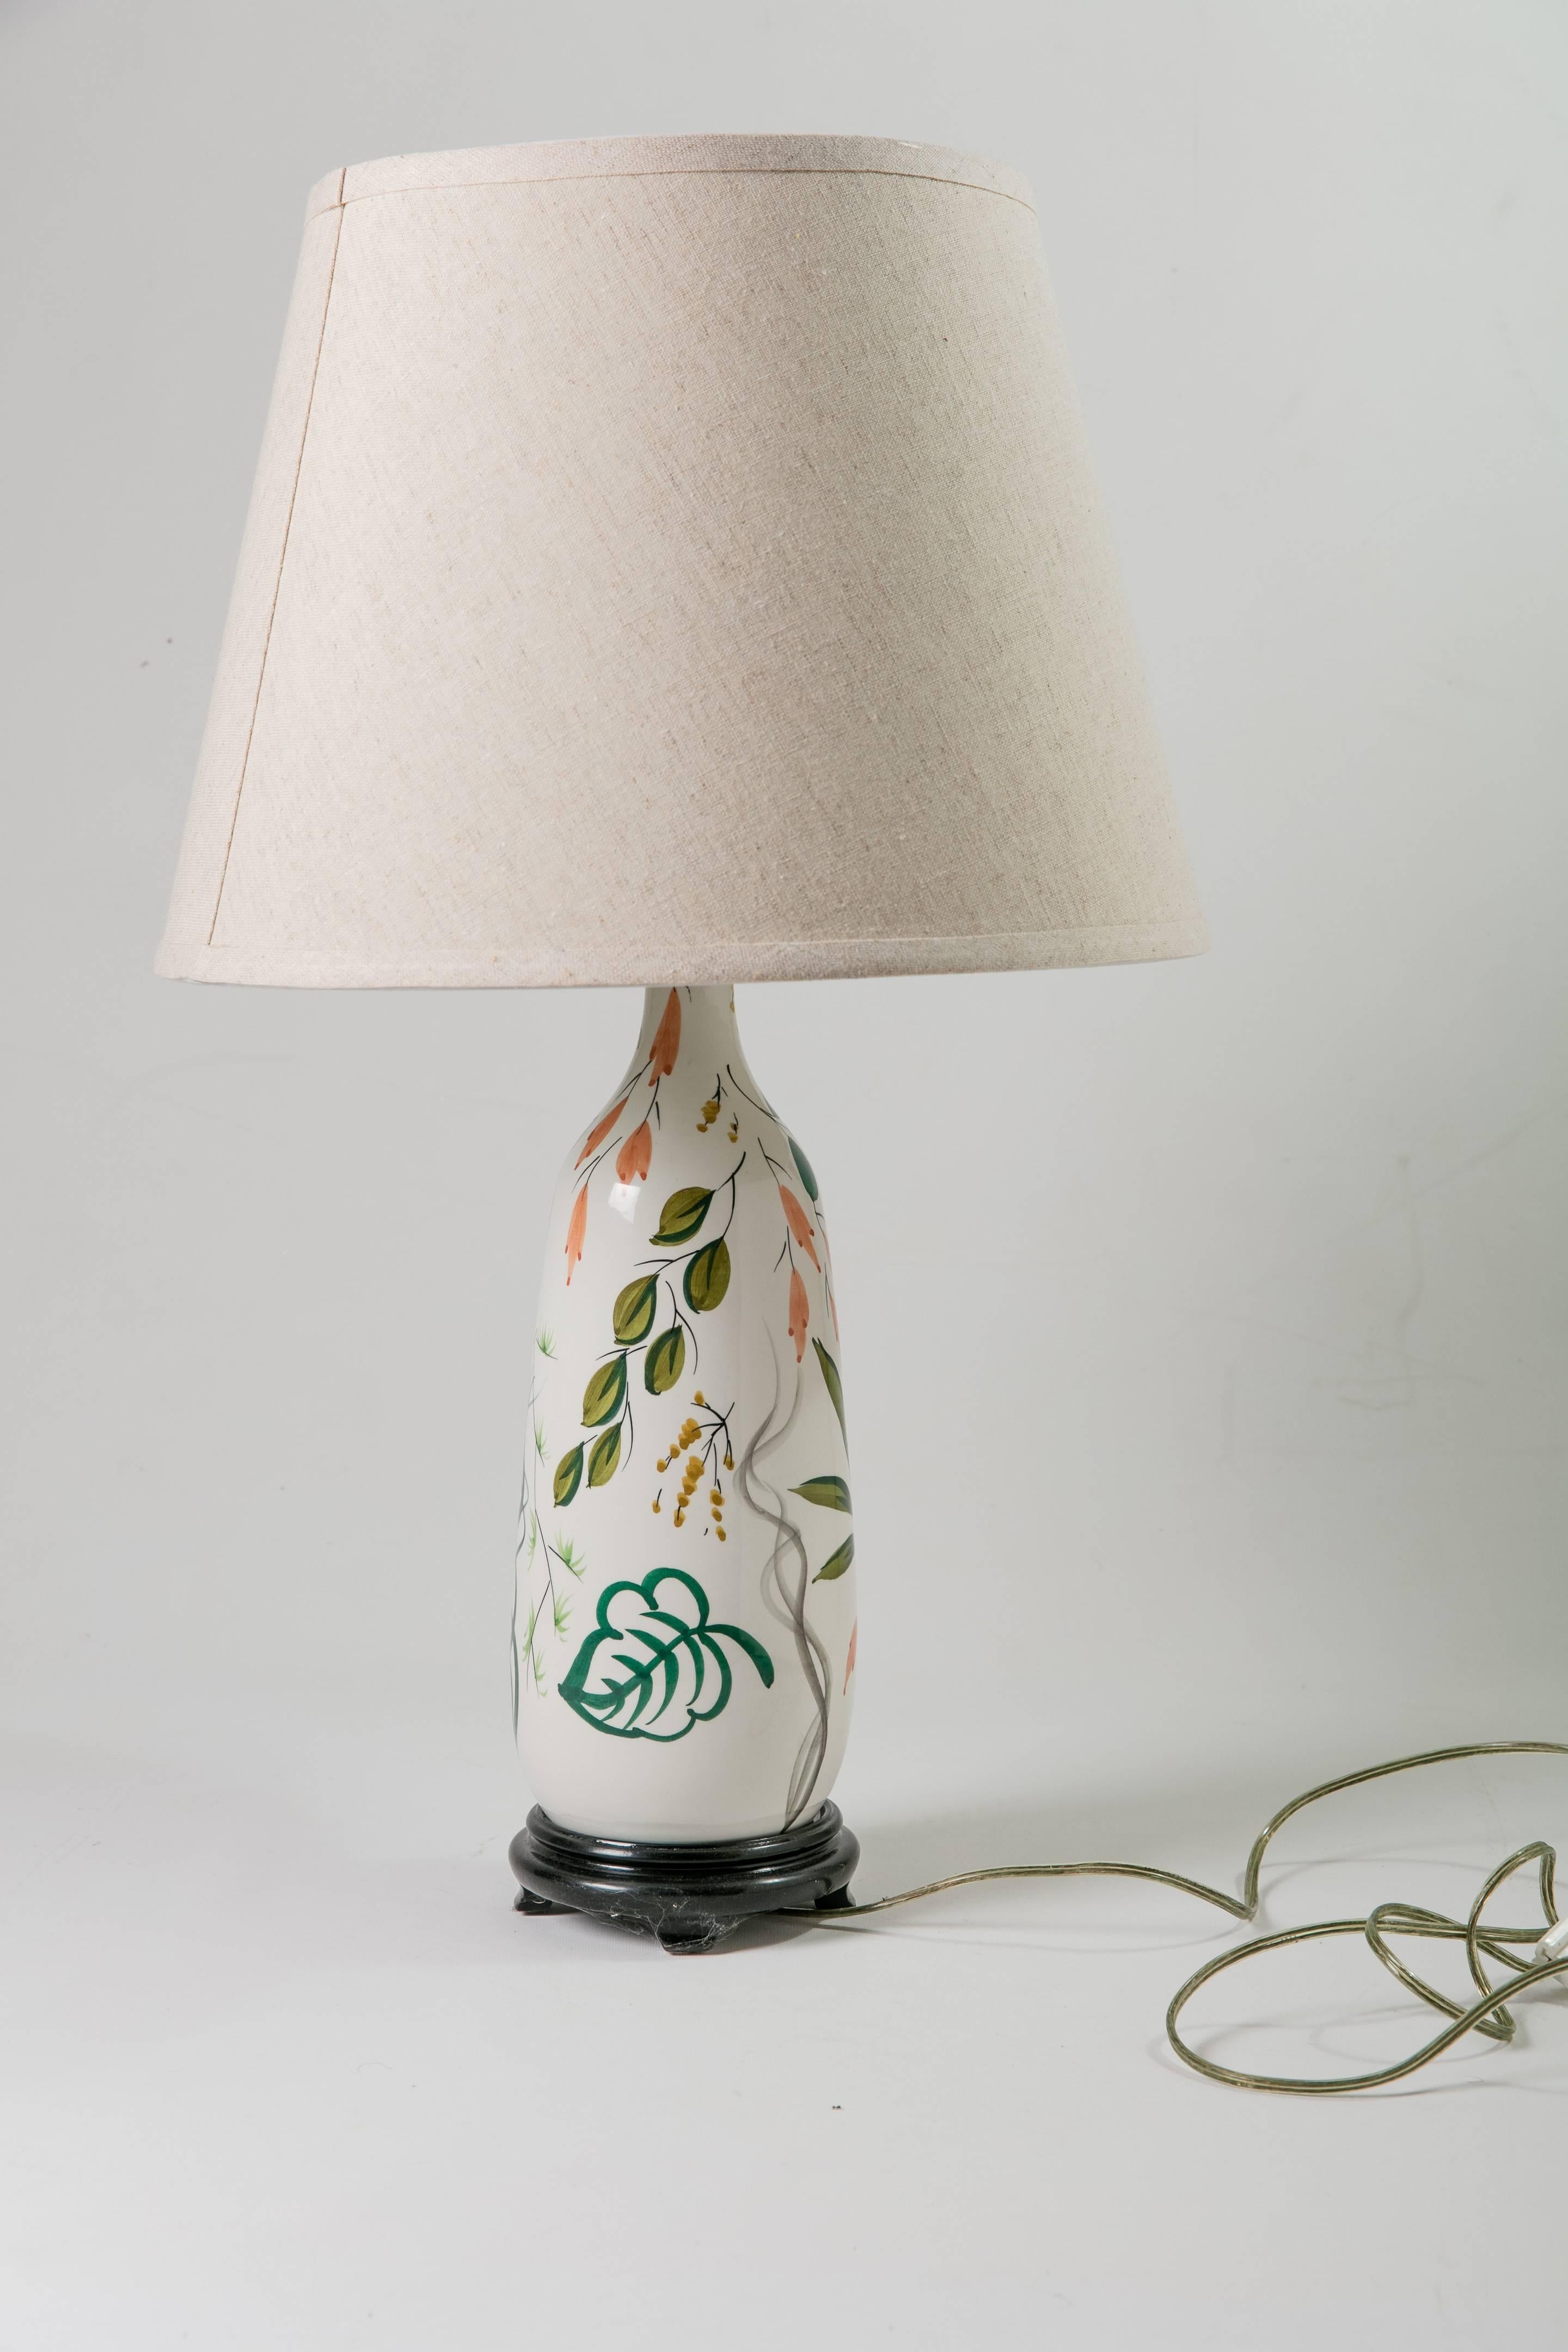 Midcentury Italian ceramic table lamp on black-painted wood base with beige linen shade. Newly wired and working; accommodates a 60W bulb. Shade, 10"Dia top x 15" Dia bottom x 11"H.